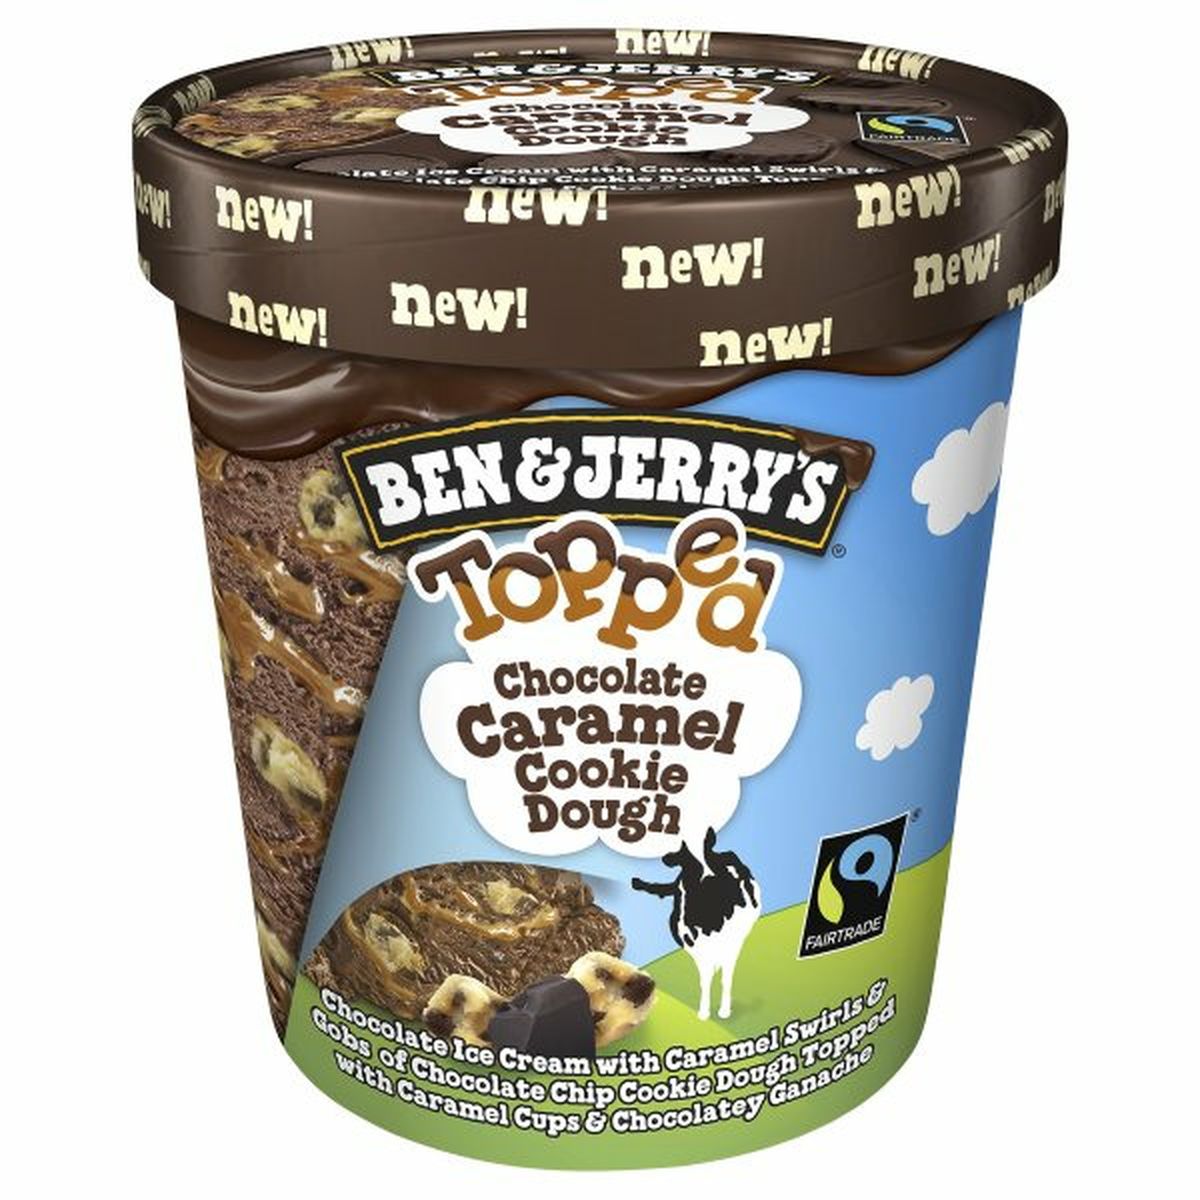 Calories in Ben & Jerry's Topped Ice Cream, Chocolate Caramel Cookie Dough